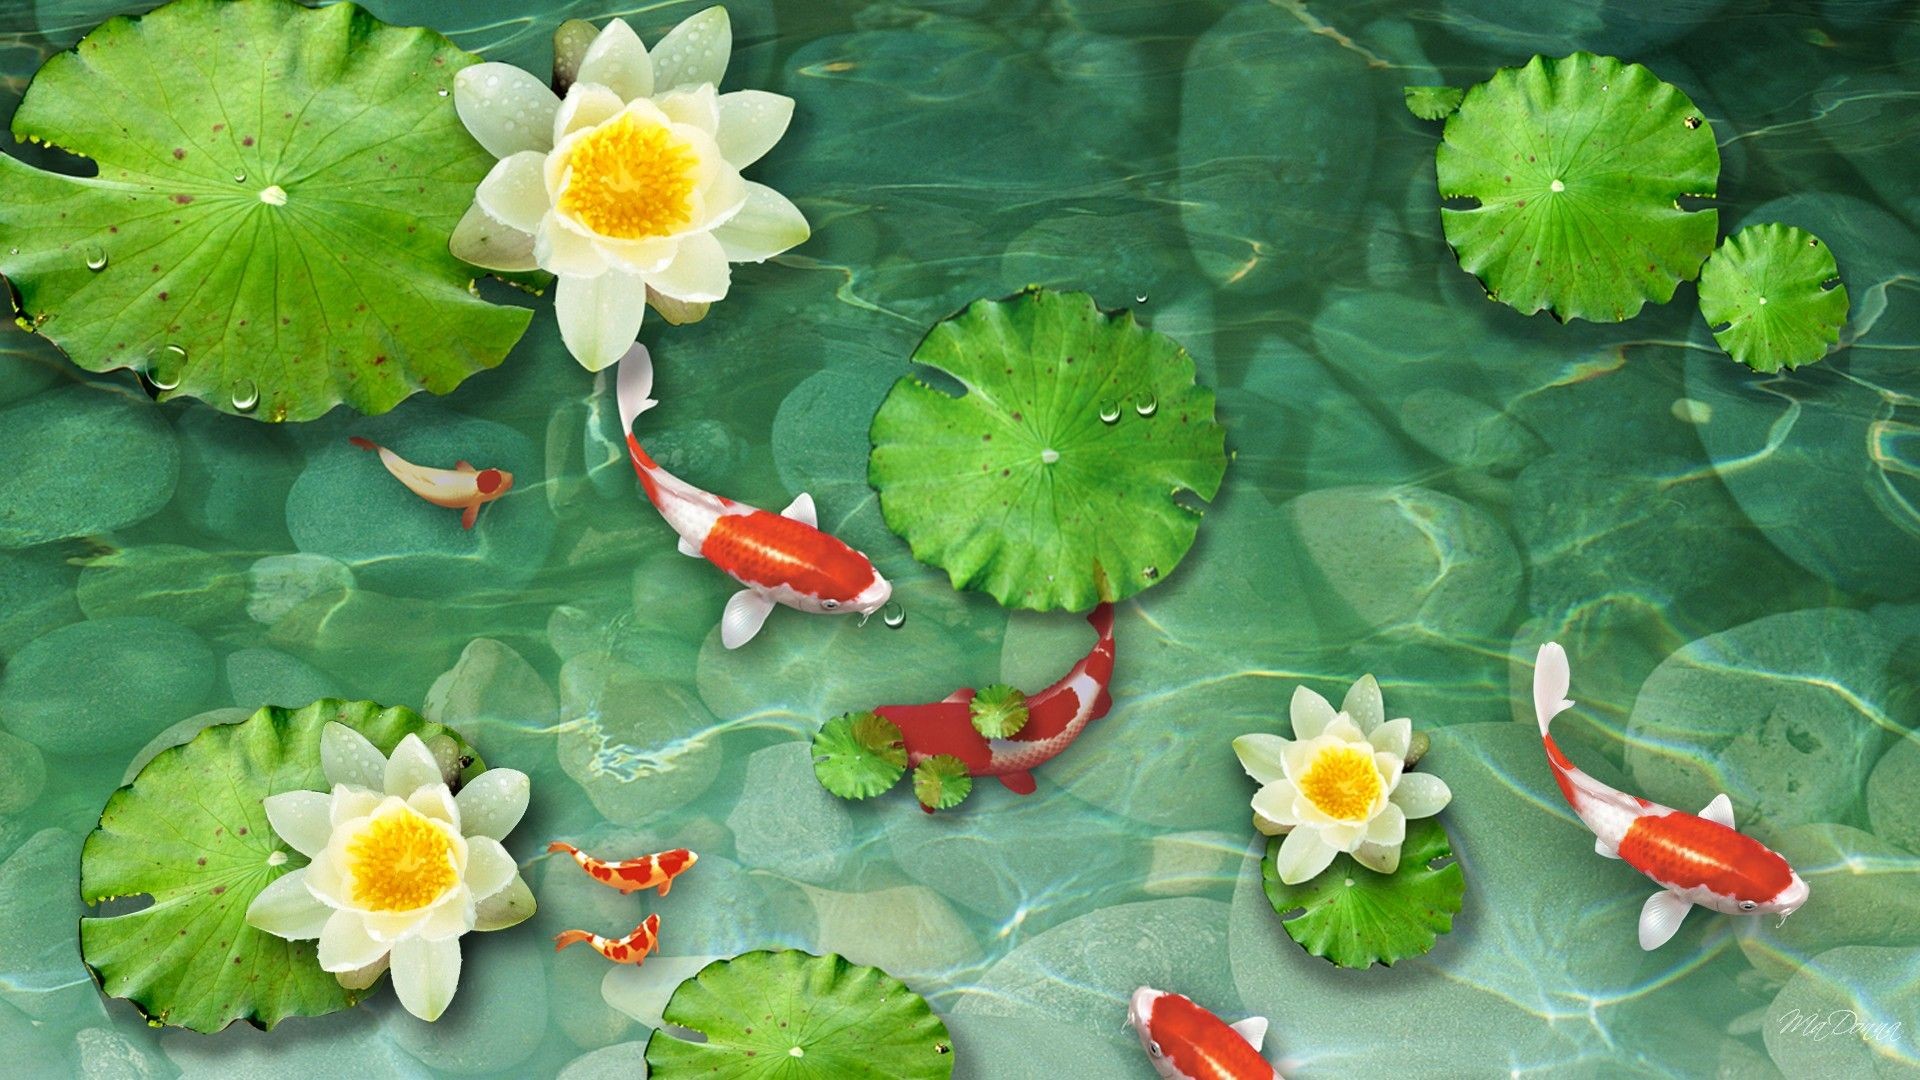 Undefined Koi Wallpaper Wallpapers Adorable Wallpapers - Desktop Wallpaper Lotus Pond - HD Wallpaper 